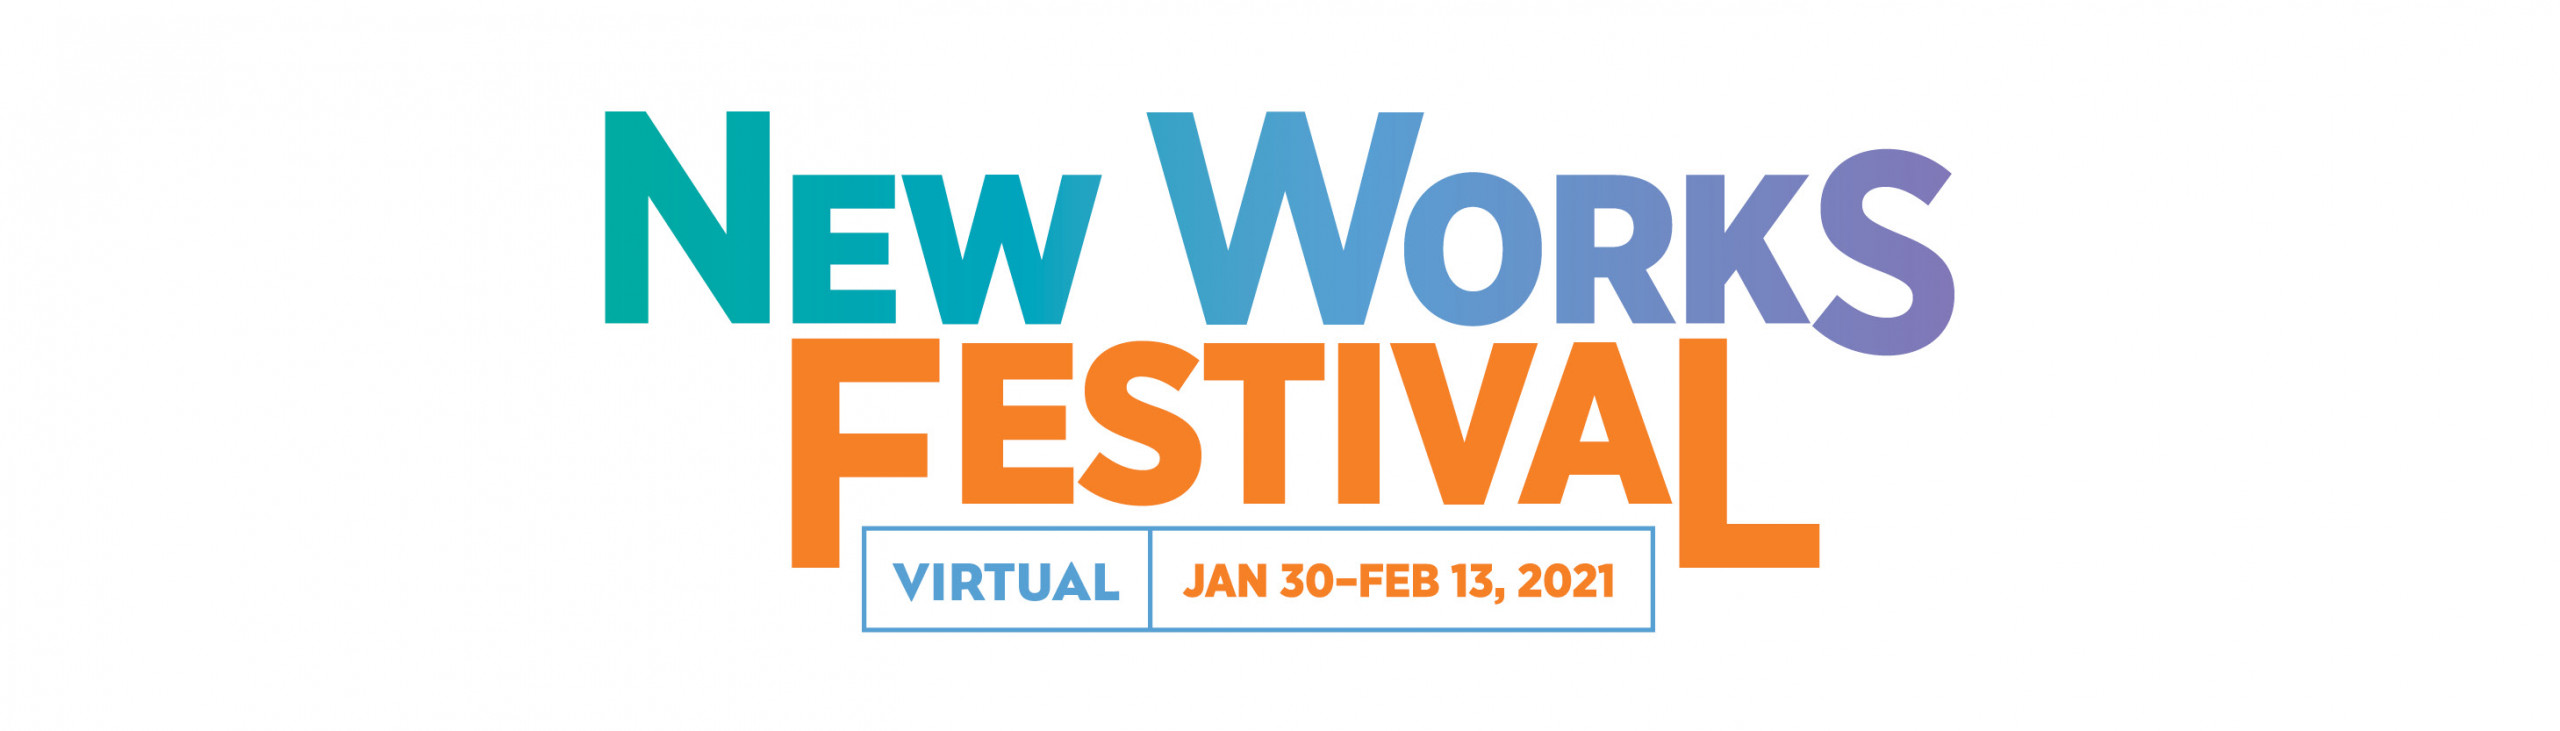 New Works Festival Logo and Dates (Jan 30-Feb 13, 2021)